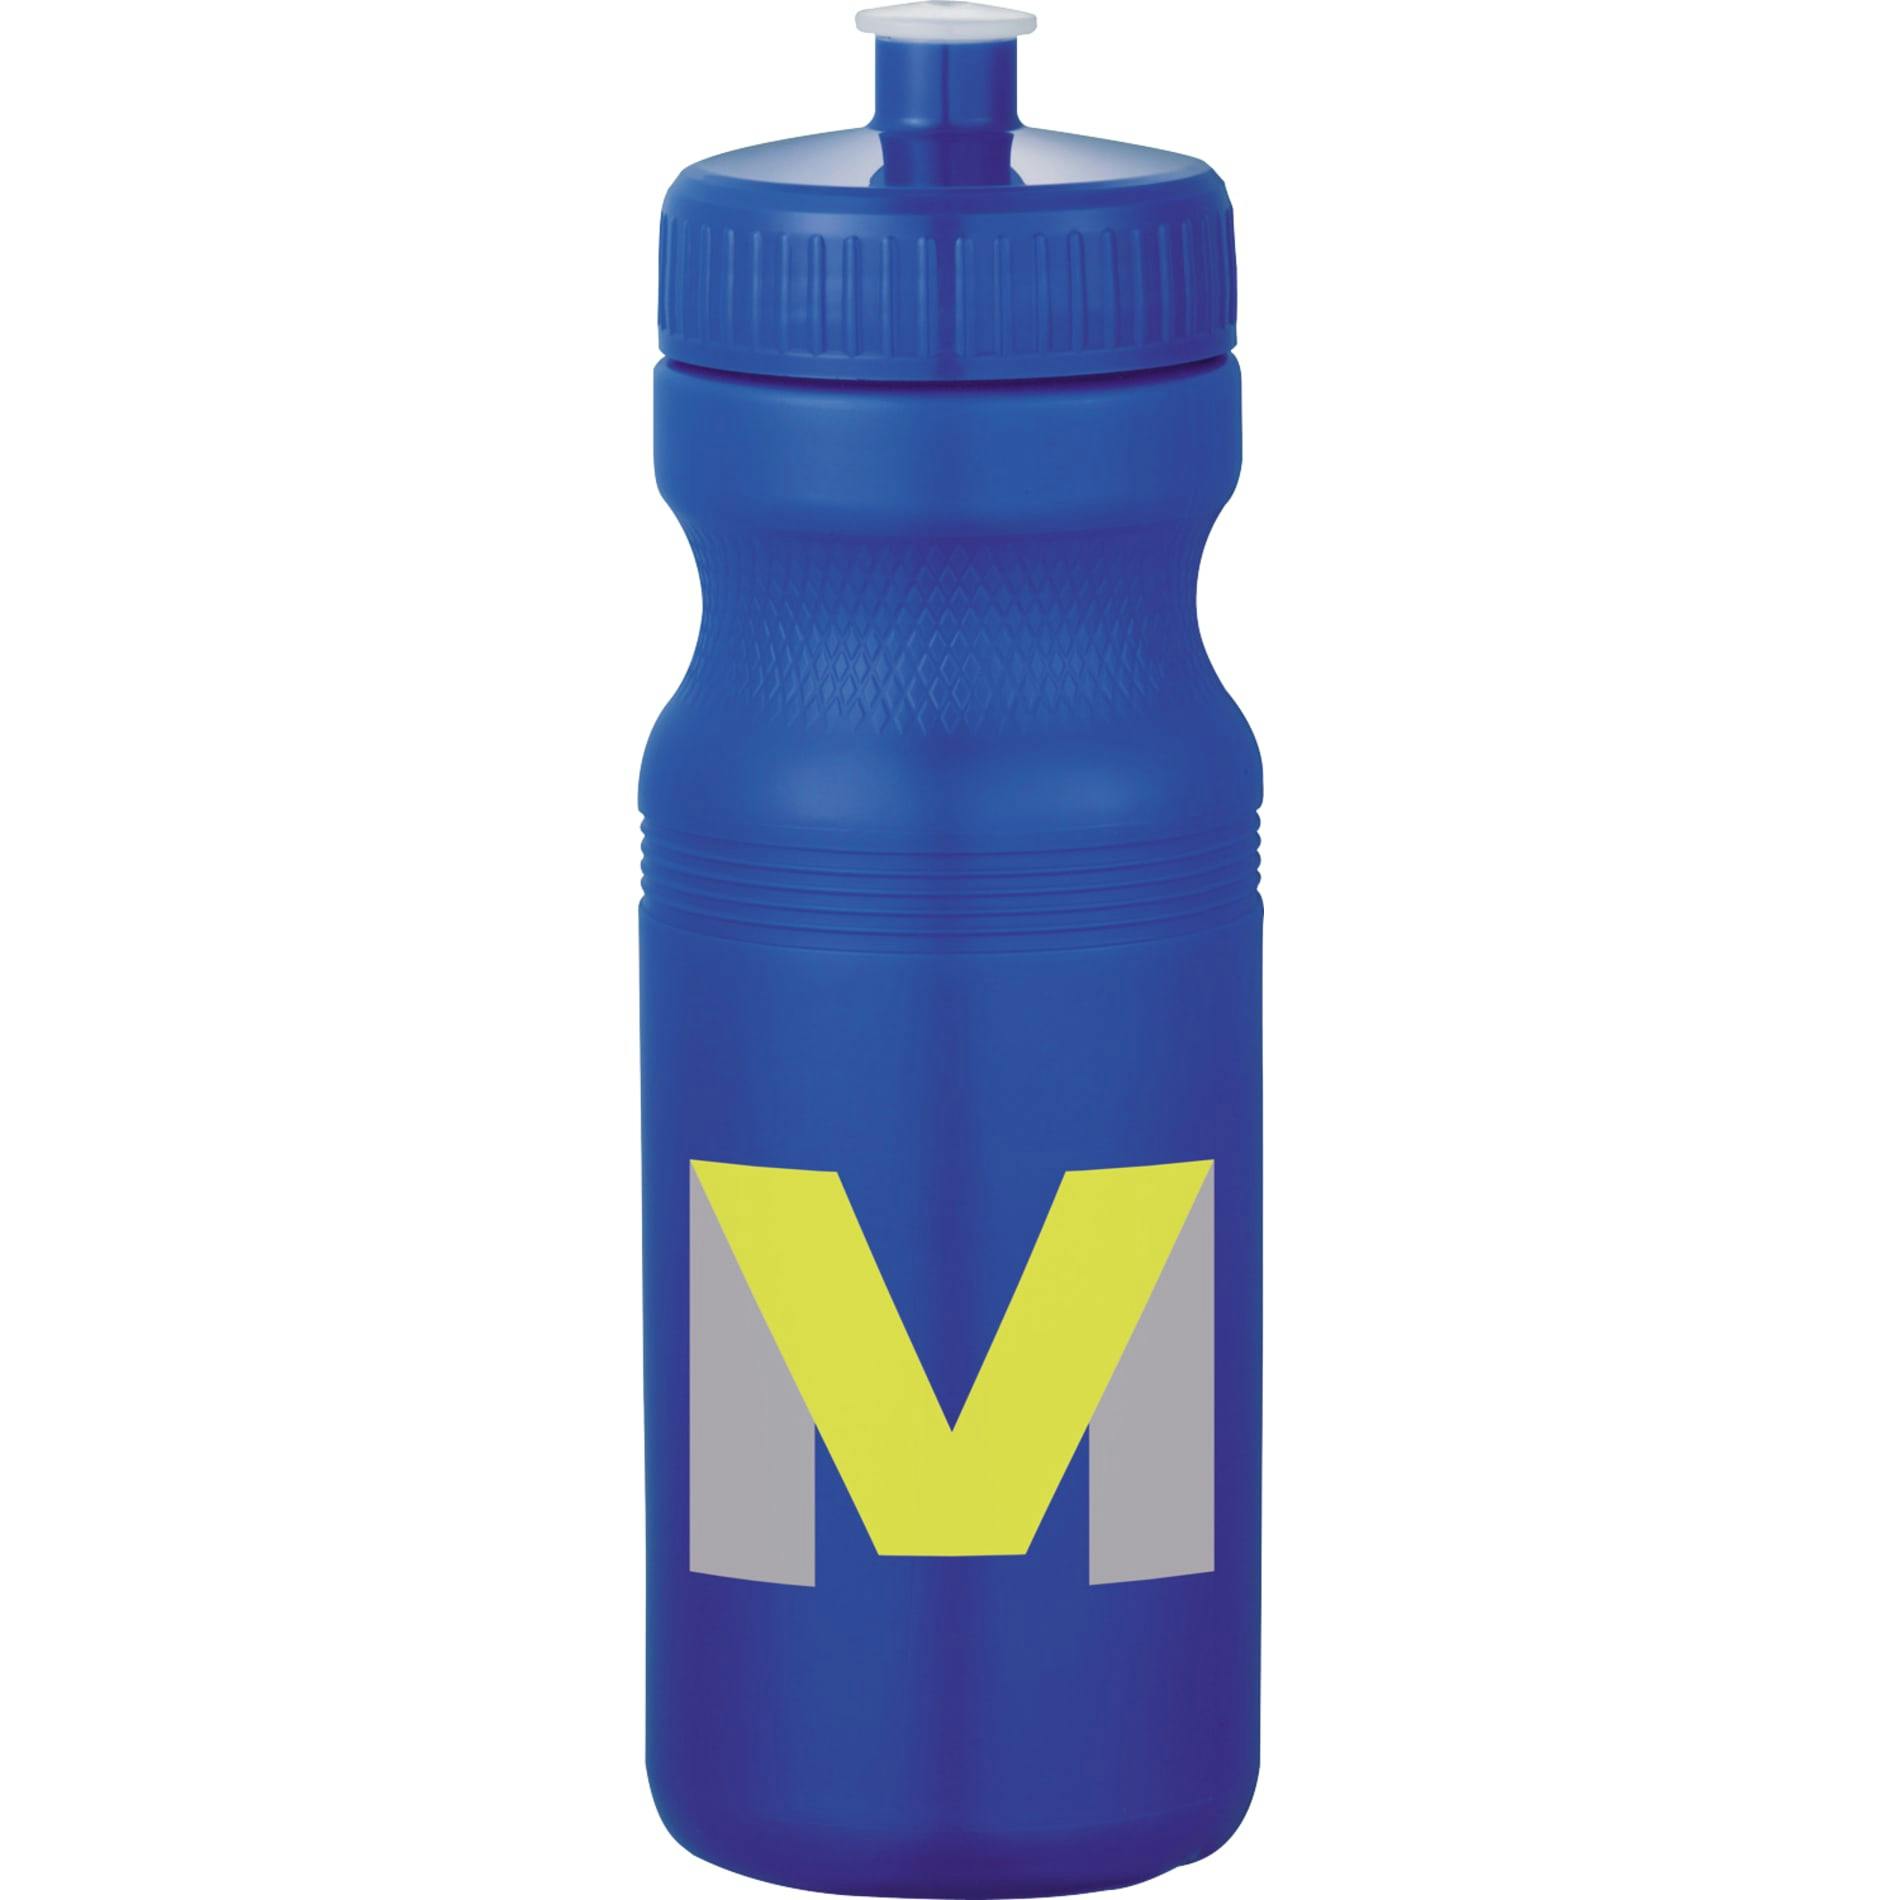 Easy Squeezy Spirit 24oz Sports Bottle - additional Image 1